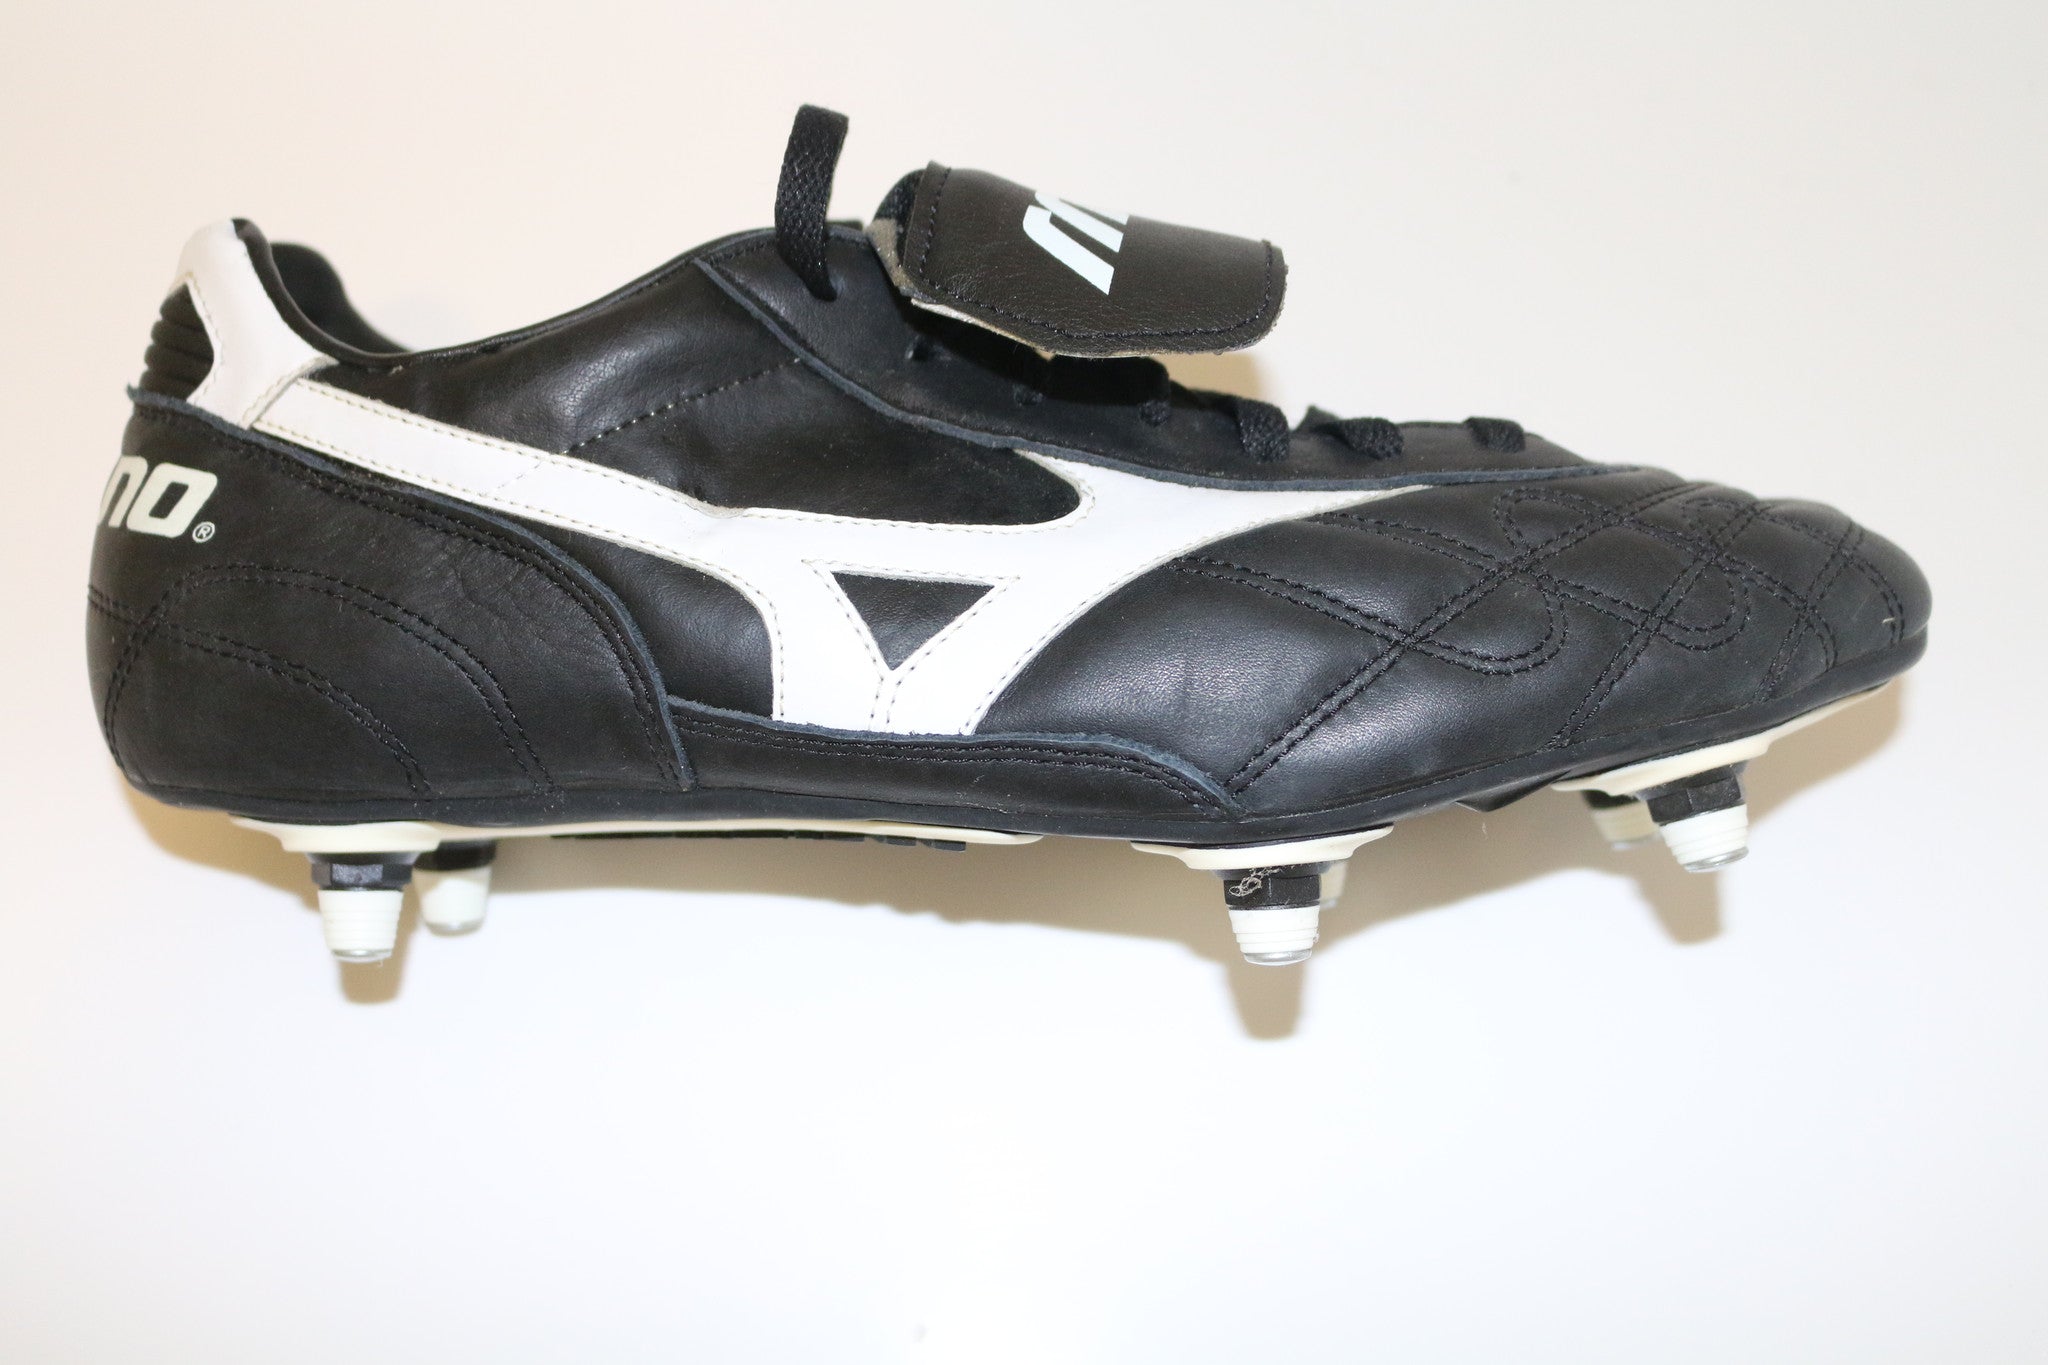 Mizuno Football Boots Uk Online Sale, UP TO 55% OFF